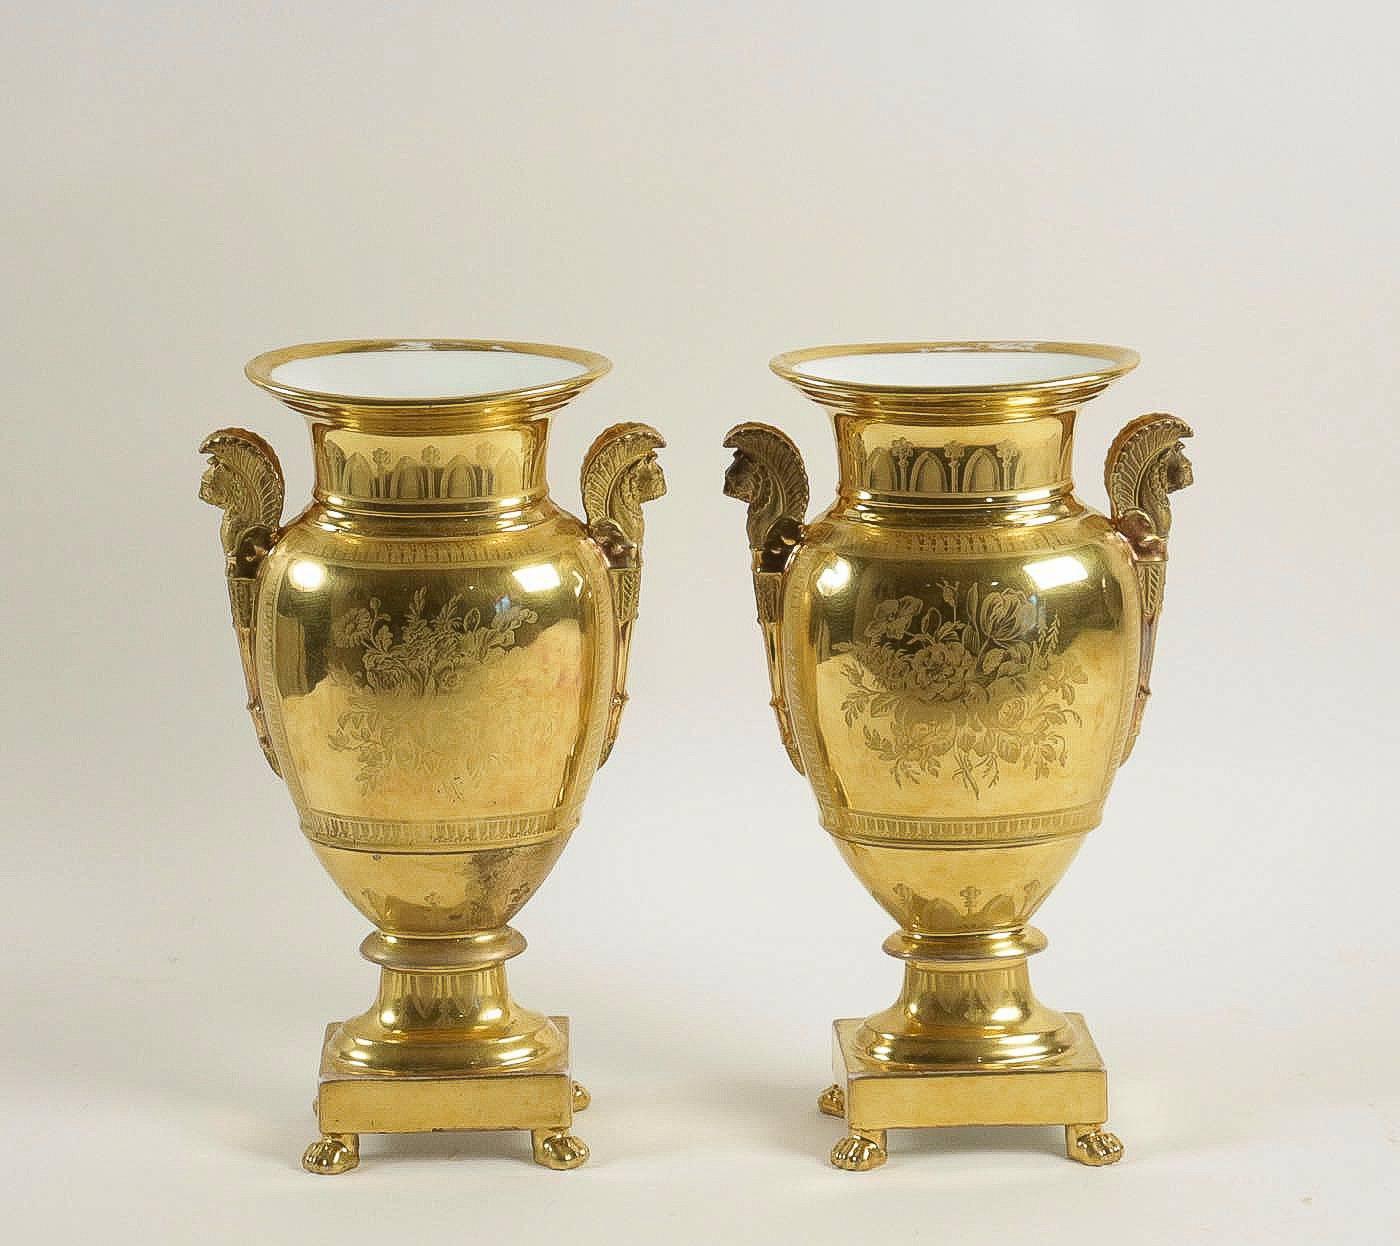 French Empire Period, Rare Pair of Vases Stamped by Darte Freres Palais Royal 2